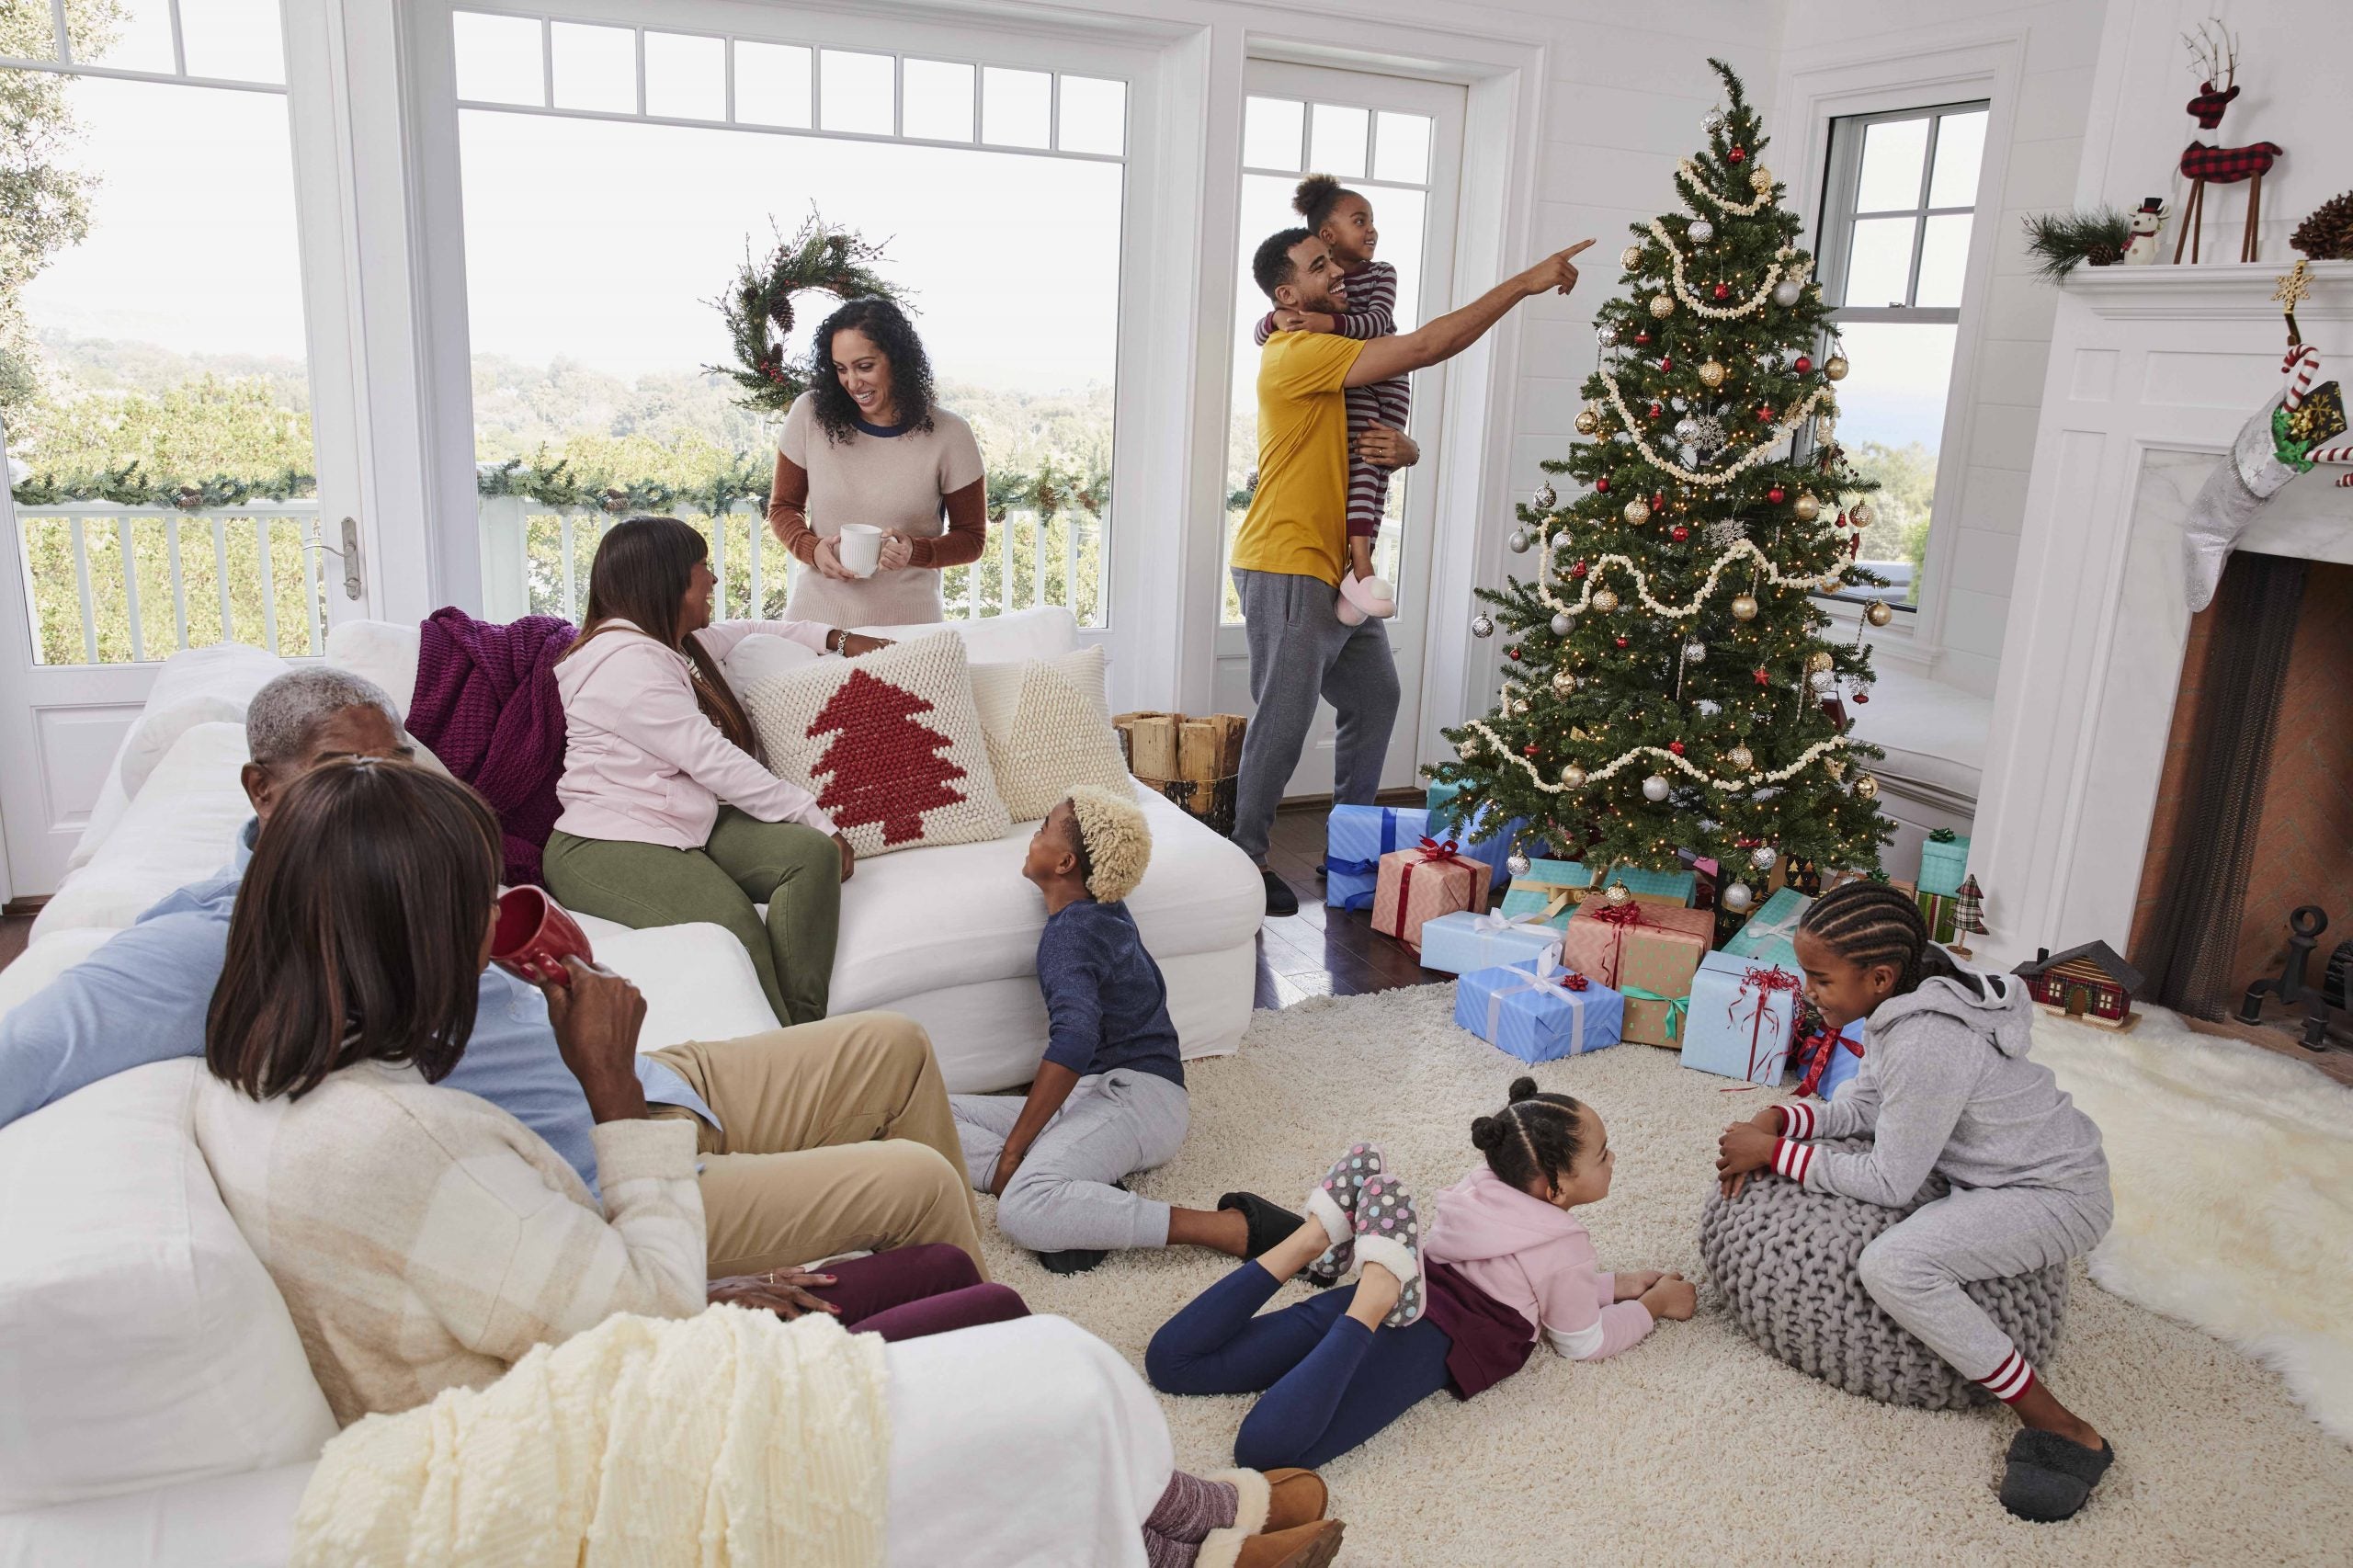 Epic Ideas for Getting Ready for the Holidays